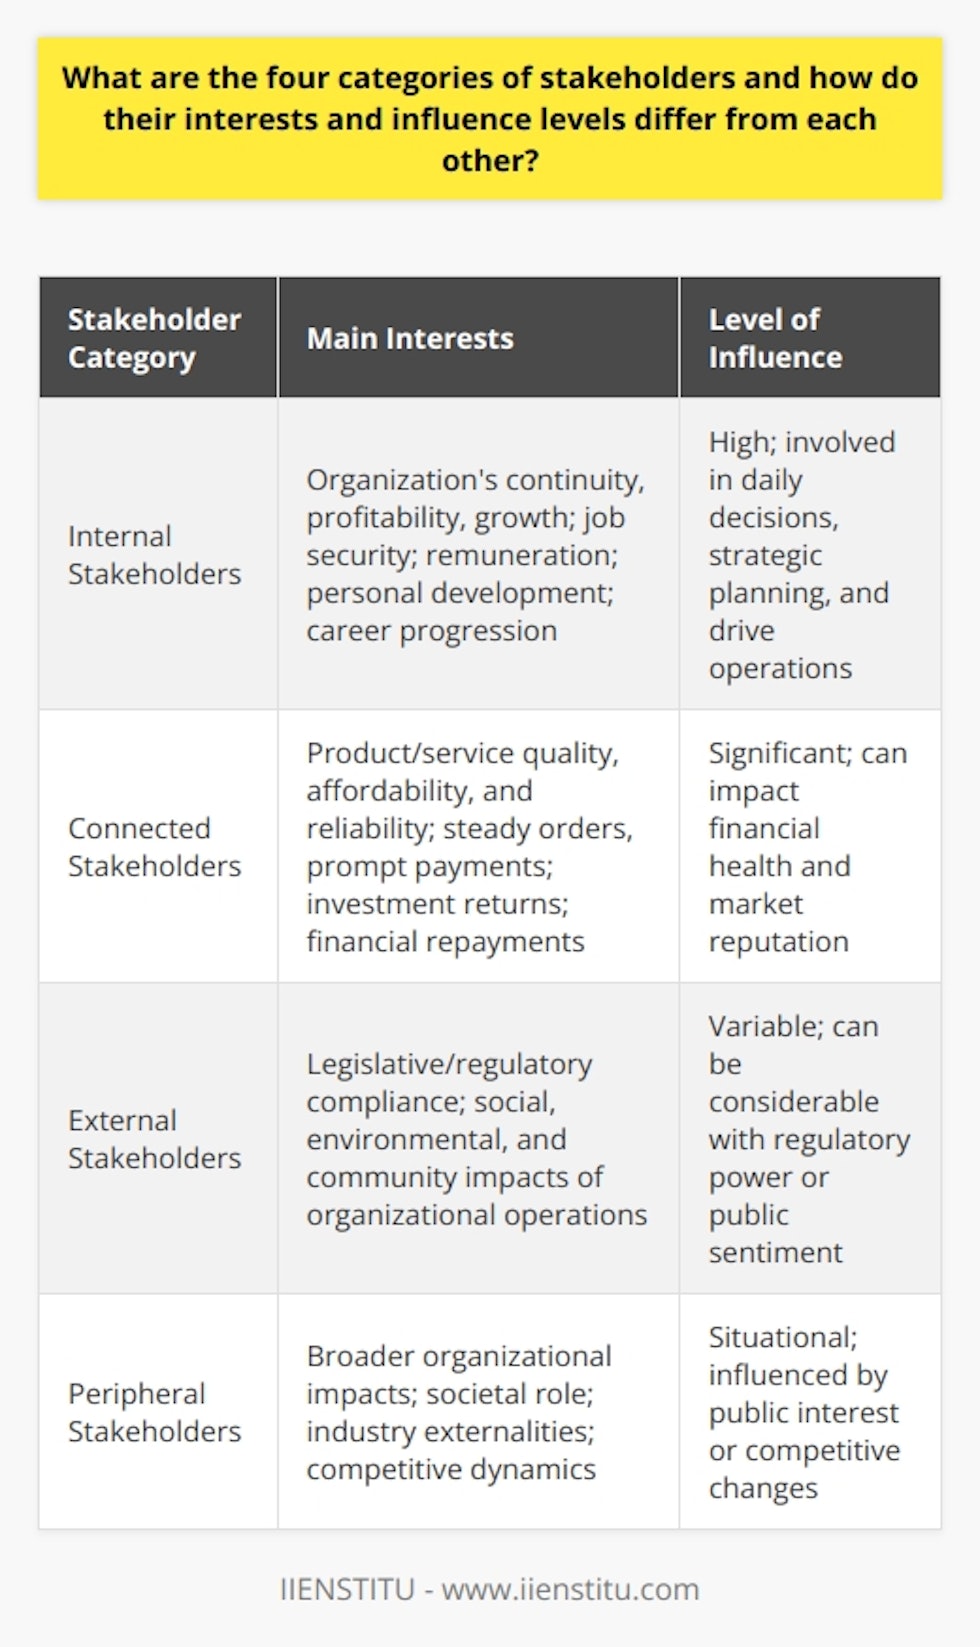 Understanding the stakeholders involved with an organization or project is crucial for successful management and operations. Stakeholders have the ability to impact or be impacted by the outcomes of an organization's actions, objectives, and policies. There are four categories of stakeholders, each with disparate interests and levels of influence. In this examination, we detail these categories and how they differ from one another.1. Internal Stakeholders:Internal stakeholders are those who are intrinsically associated with the organization. They consist of employees, managers, executives, and the board of directors. The primary interest of internal stakeholders revolves around the organization's continuity, profitability, and growth, as these directly influence their job security, remuneration, personal development, and career progression. These stakeholders hold considerable influence as they are involved in day-to-day decision-making, define company culture, contribute to strategic planning, and drive the organization's operations.2. Connected Stakeholders:Connected stakeholders have a direct economic or contractual relationship with the organization. This category includes customers, suppliers, creditors, and investors. Customers seek quality, affordability, and reliable products or services. Suppliers look for steady orders and prompt payments, while investors and creditors are concerned with the return on their investments and timely financial repayments. Their influence is significant, as they can affect the organization’s financial health and market reputation through their buying decisions, investment capital, and supply continuity.3. External Stakeholders:These are the groups or individuals who do not have a direct connection to the organization but are nonetheless affected by its activities or can influence its outcomes. External stakeholders encompass regulatory authorities, government entities, communities, and NGOs. Their interests can range widely, from ensuring legislative and regulatory compliance to advocating for social, environmental, and community considerations in the organization's operations. The level of influence external stakeholders have can be considerable, especially when they wield regulatory power, command public sentiment, or represent collective community interests.4. Peripheral Stakeholders:Peripheral or secondary stakeholders are somewhat more detached than other categories and may become relevant only under certain circumstances. They include the media, competitors, activists, and academia. The interests of these stakeholders often pertain to the broader impacts of the organization, such as its role in society, the externalities it generates, or the trends it sets within the industry. Their influence is variable and often situational, coming into play when an organization's actions become a broader public interest subject or when competitive dynamics change.Each stakeholder segment wields a unique degree of influence and exhibits distinct interests which can clash or converge with those of the organization and other stakeholders. Recognizing these dynamics is essential for managing relationships, making informed decisions, and navigating the complex interplay of organizational influence. Knowing how to effectively engage and communicate with each category of stakeholders is a strategic imperative that can lead to more sustainable and mutually beneficial outcomes.